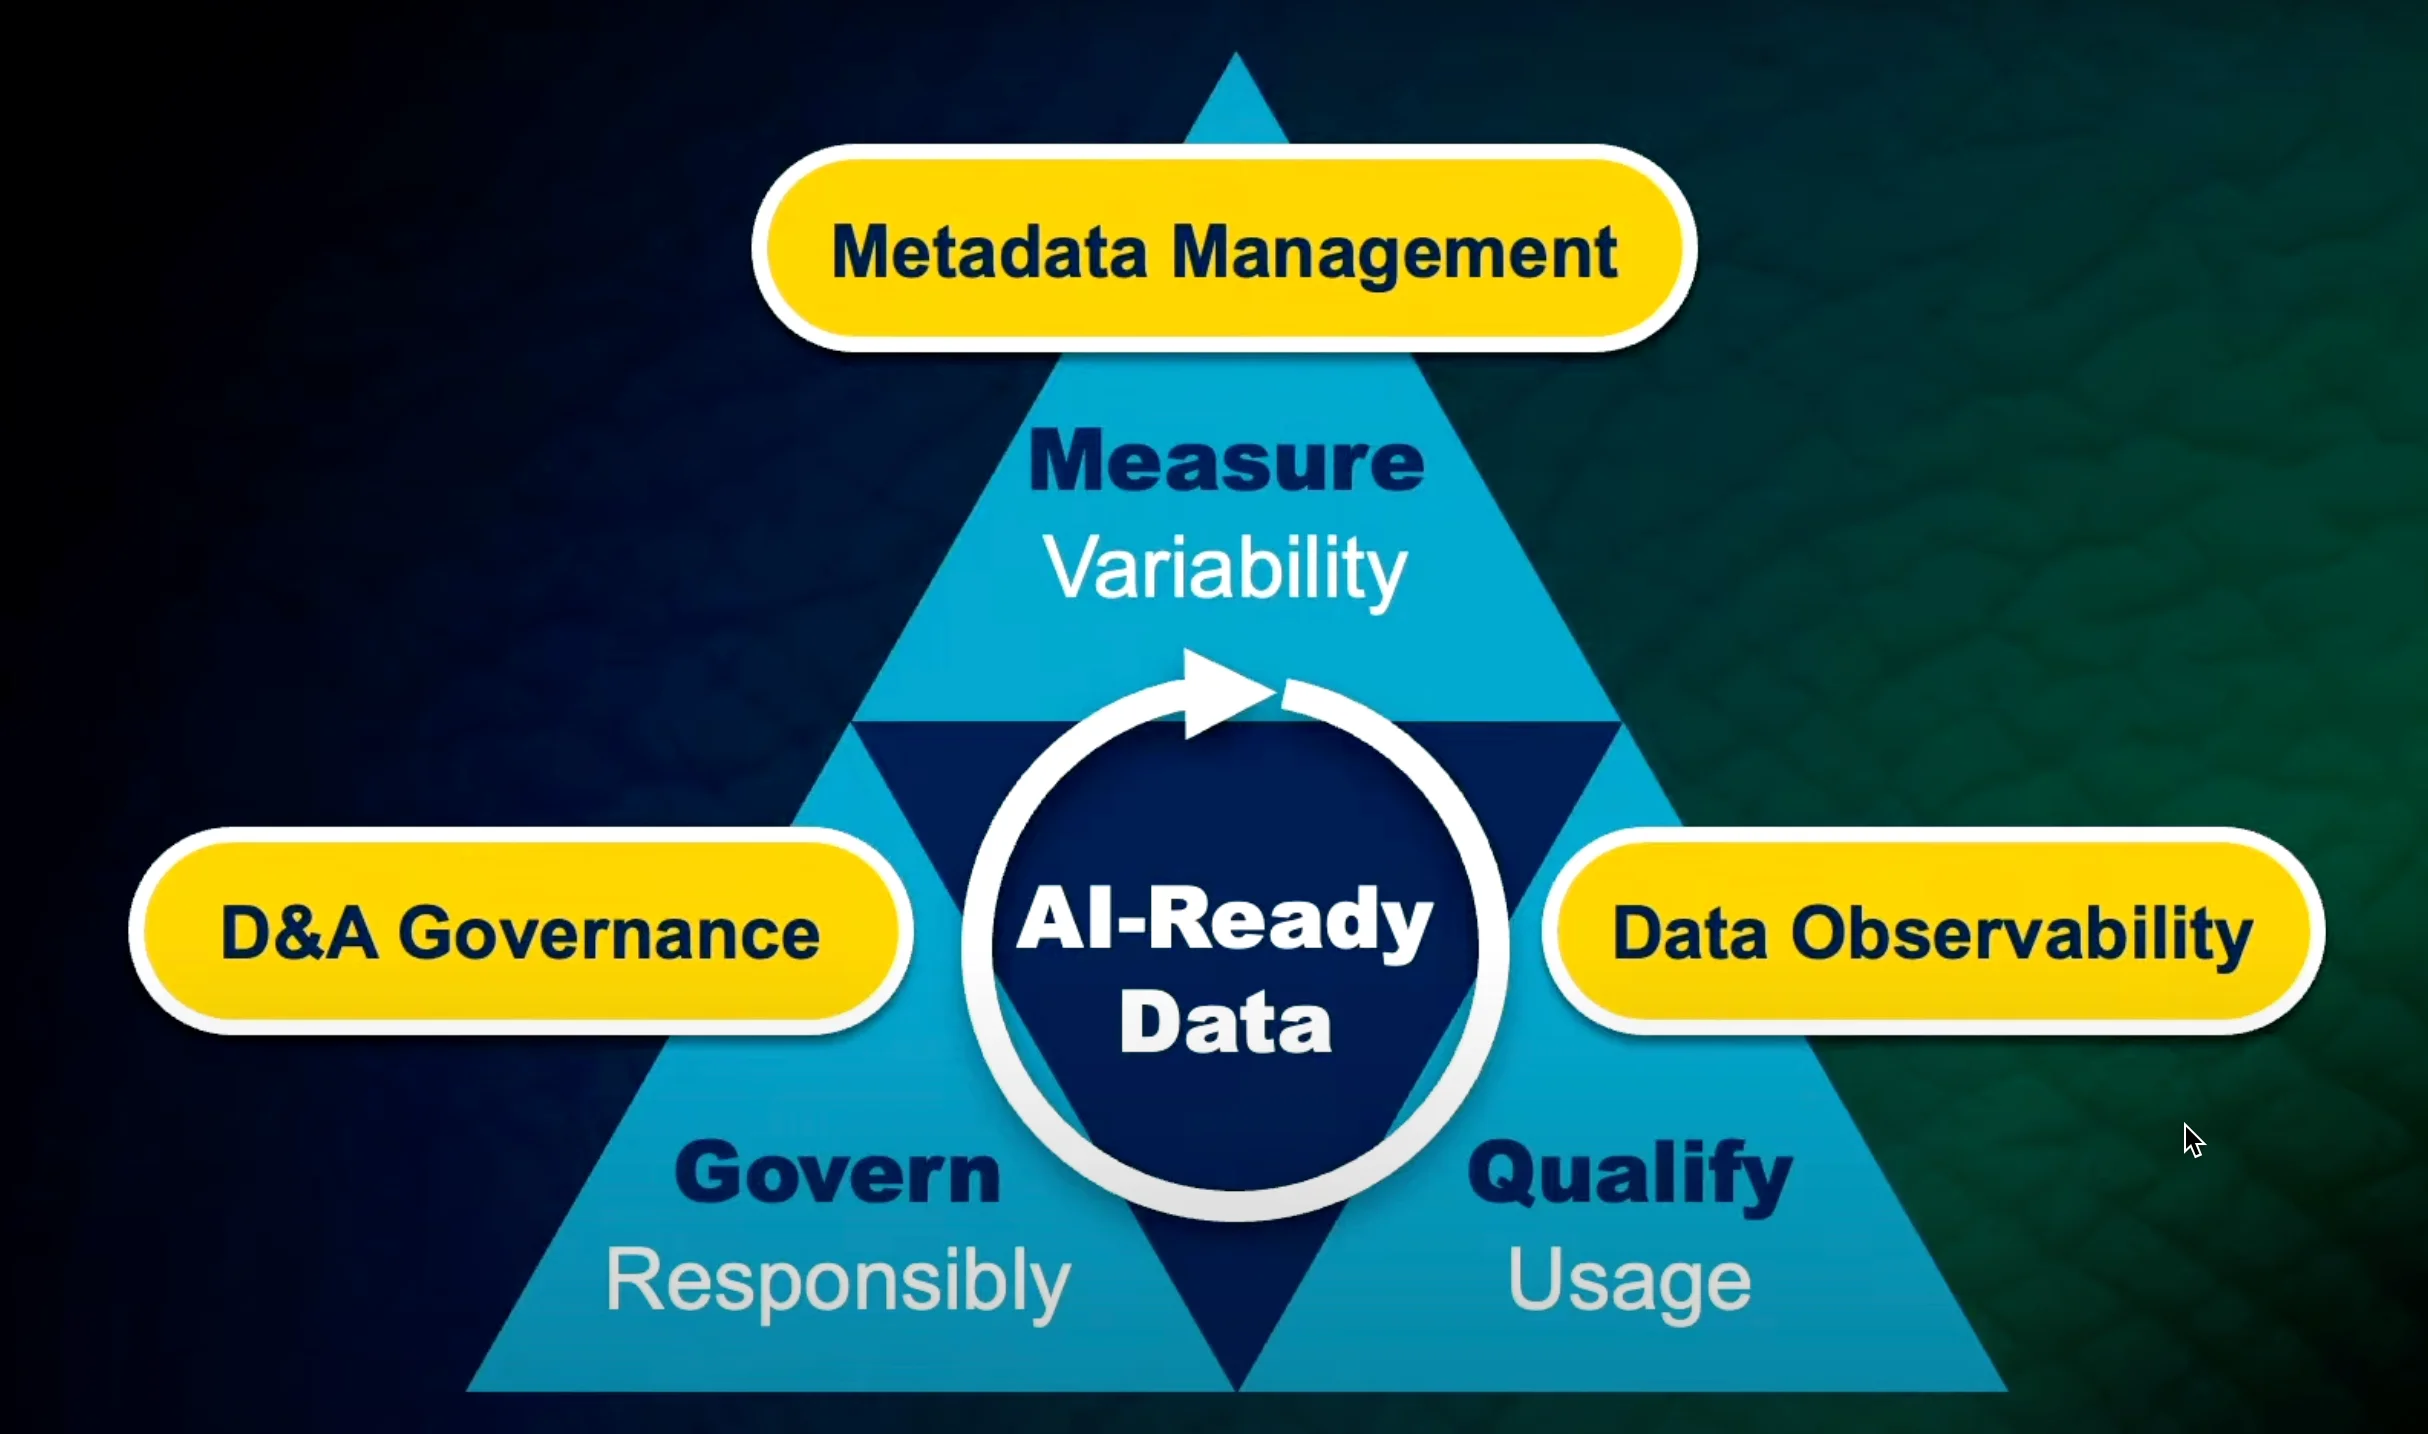 The role of metadata management in AI-readiness of enterprise data, according to Gartner